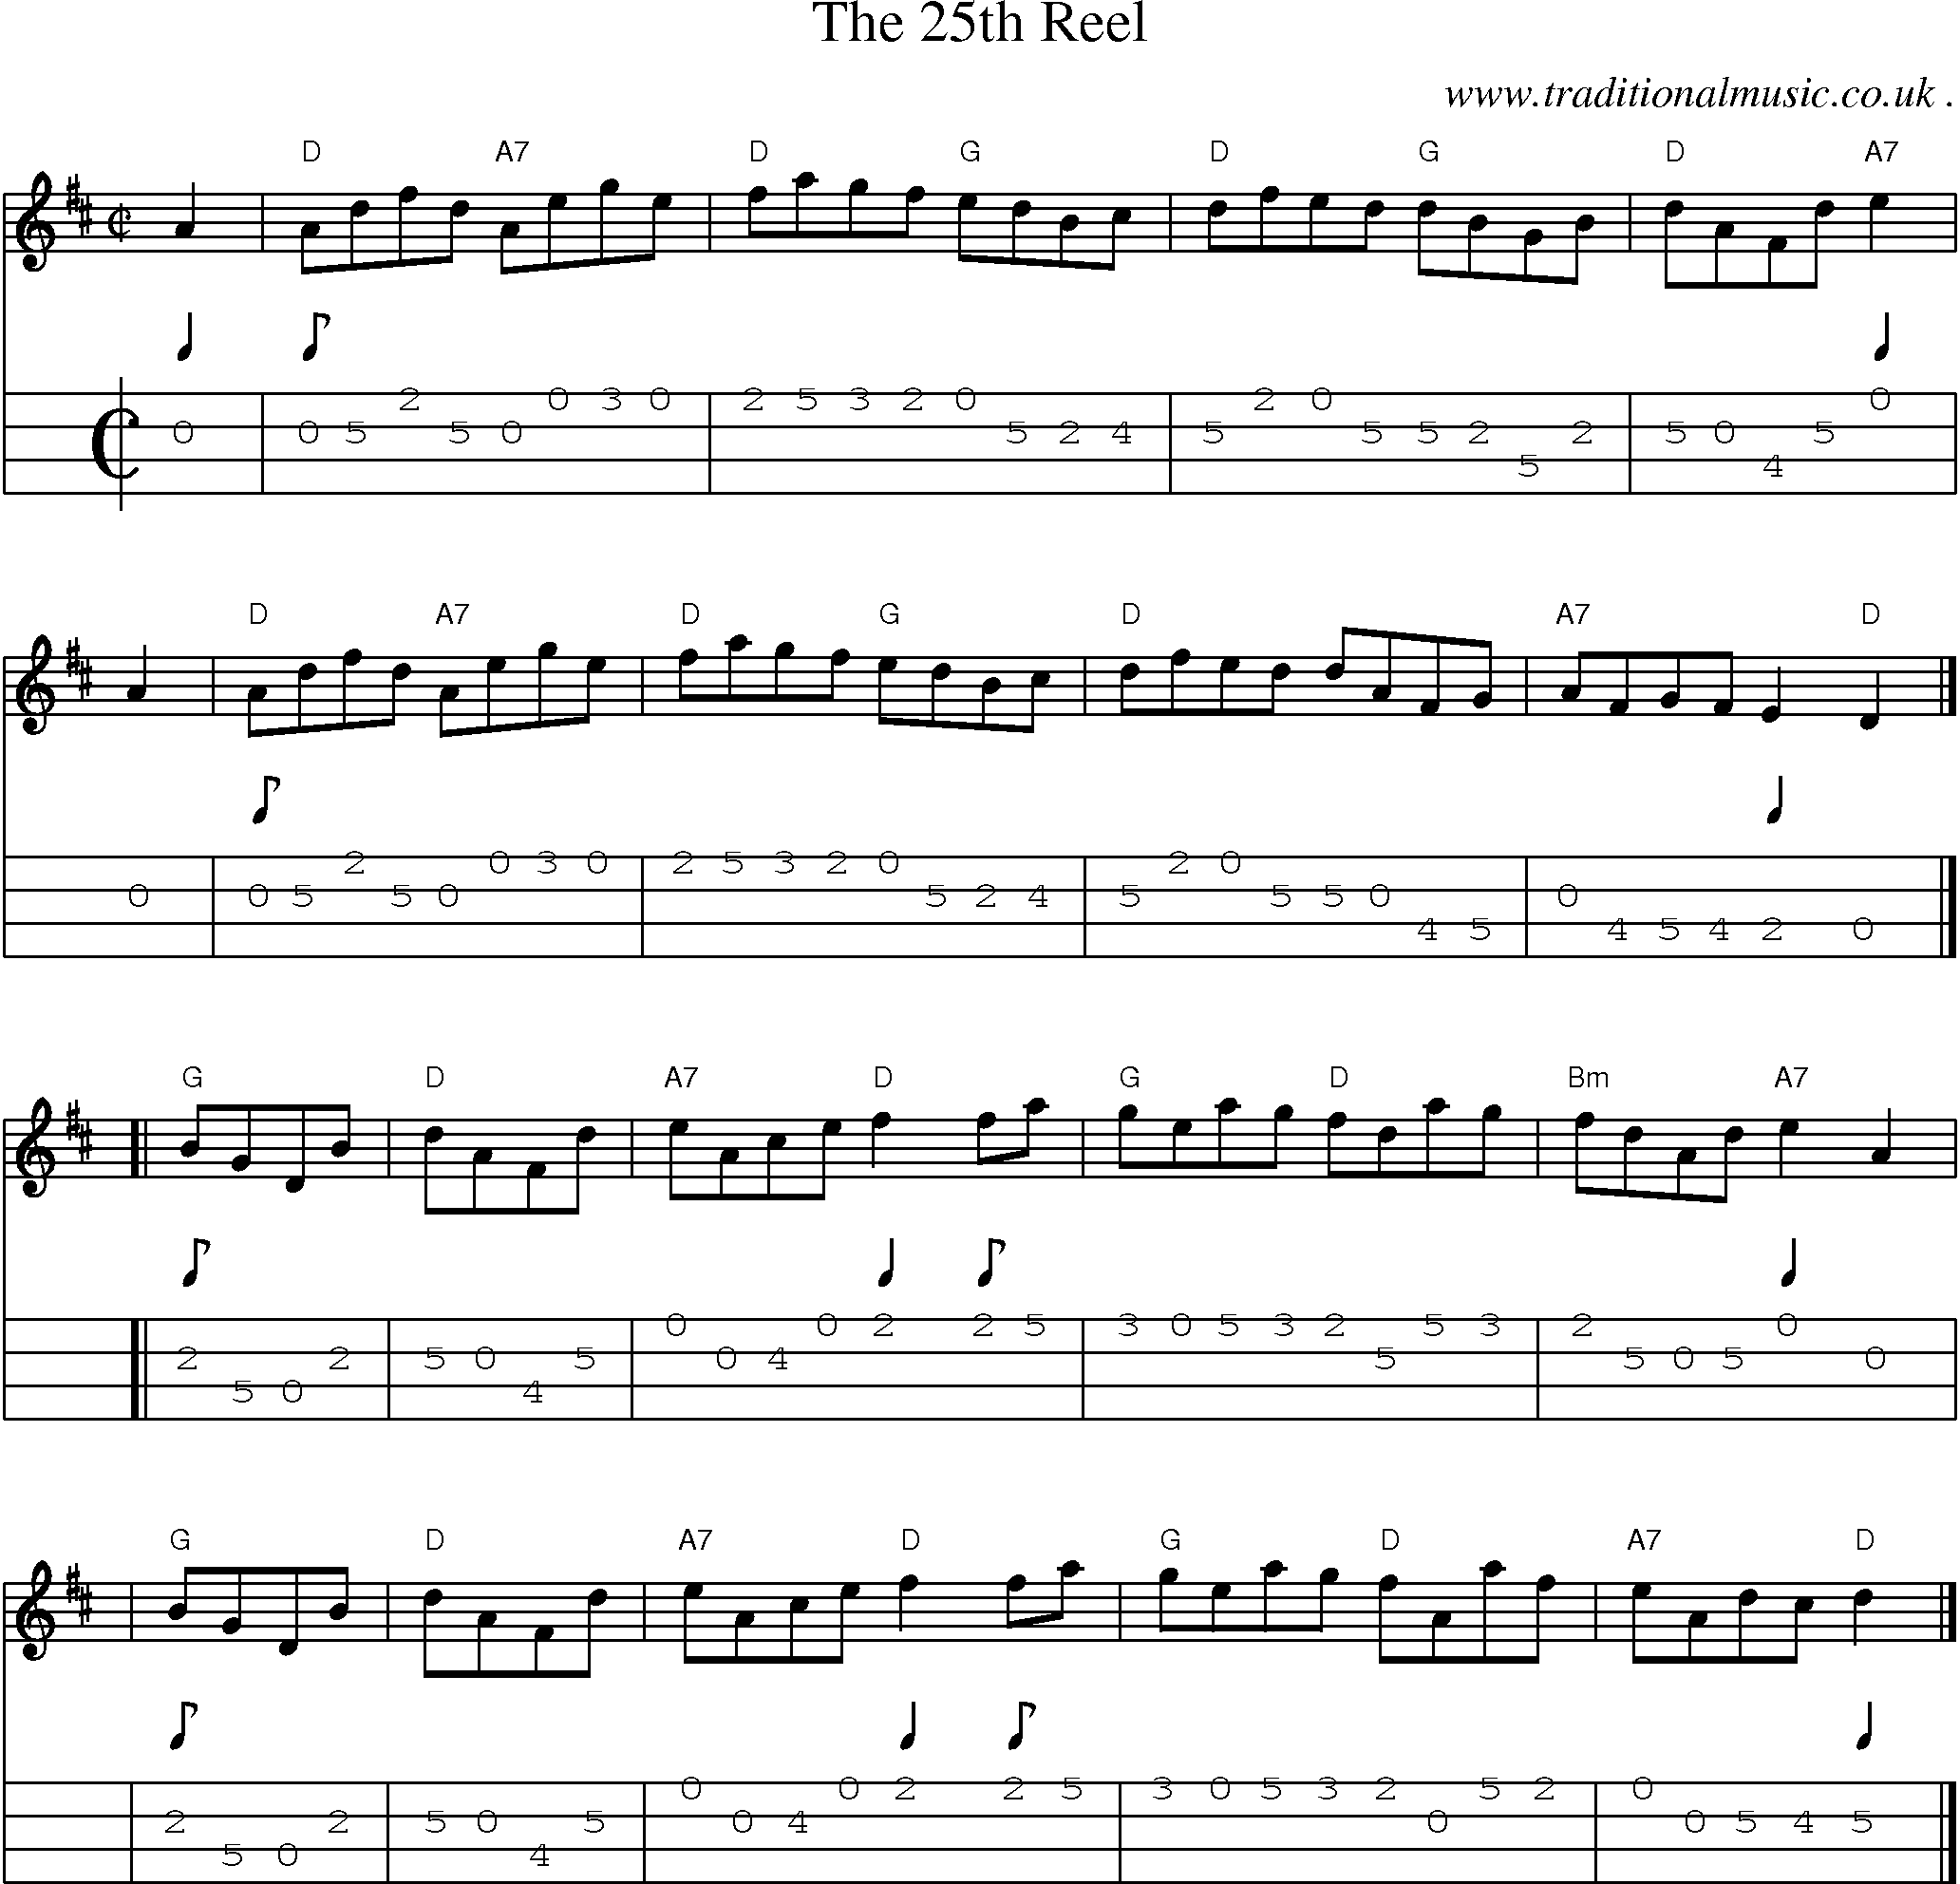 Sheet-music  score, Chords and Mandolin Tabs for The 25th Reel